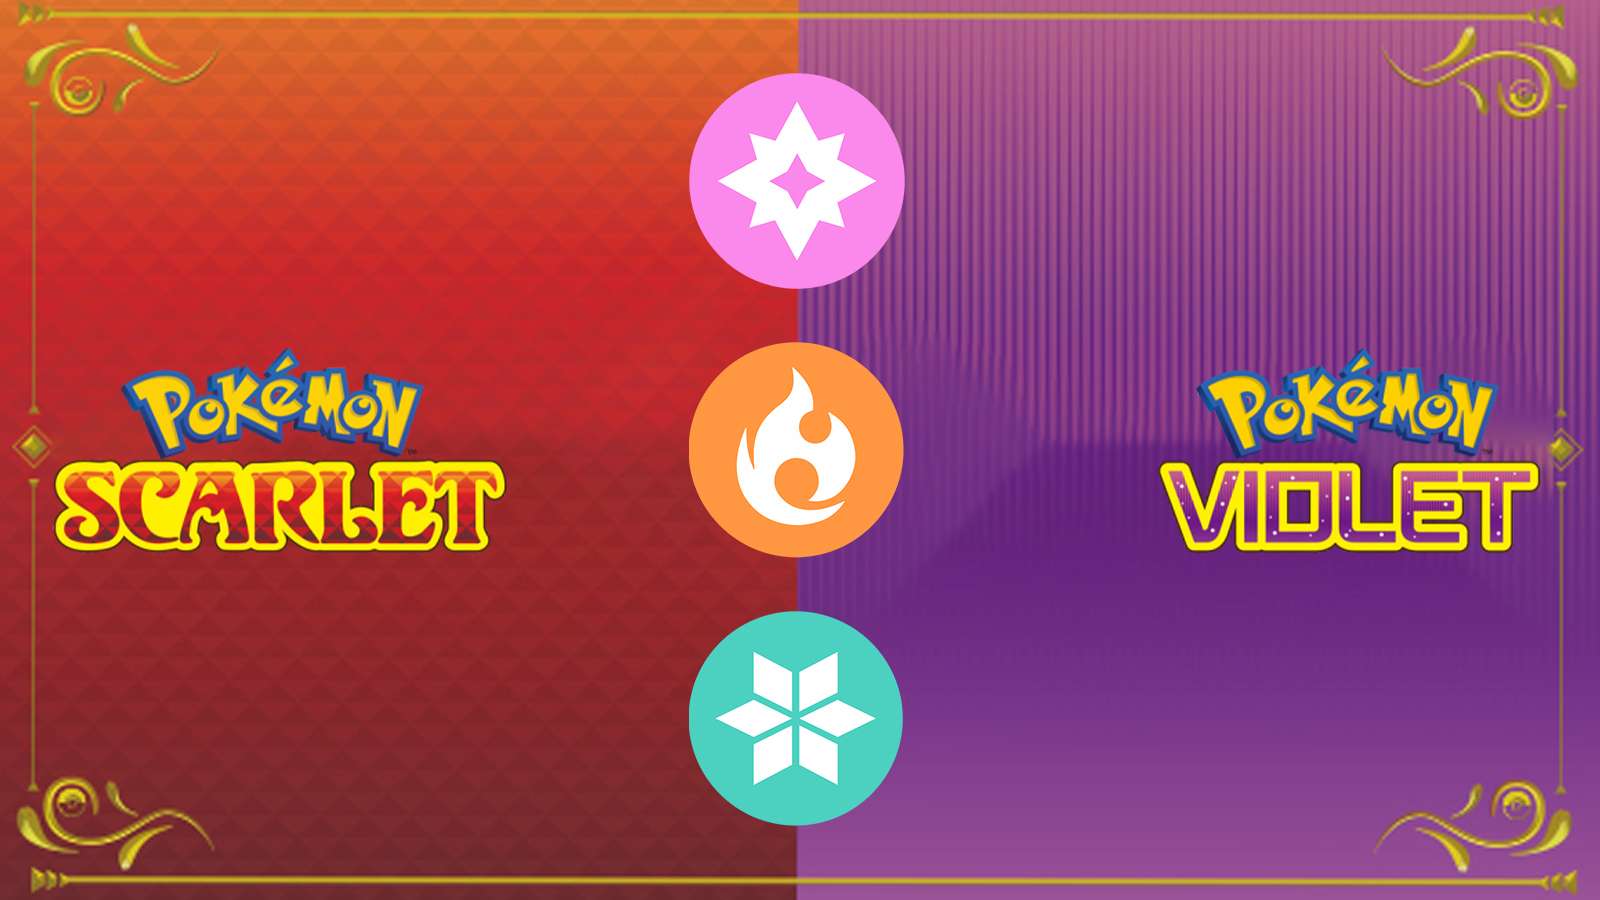 Pokemon Scarlet & Violet logos with type chart icons